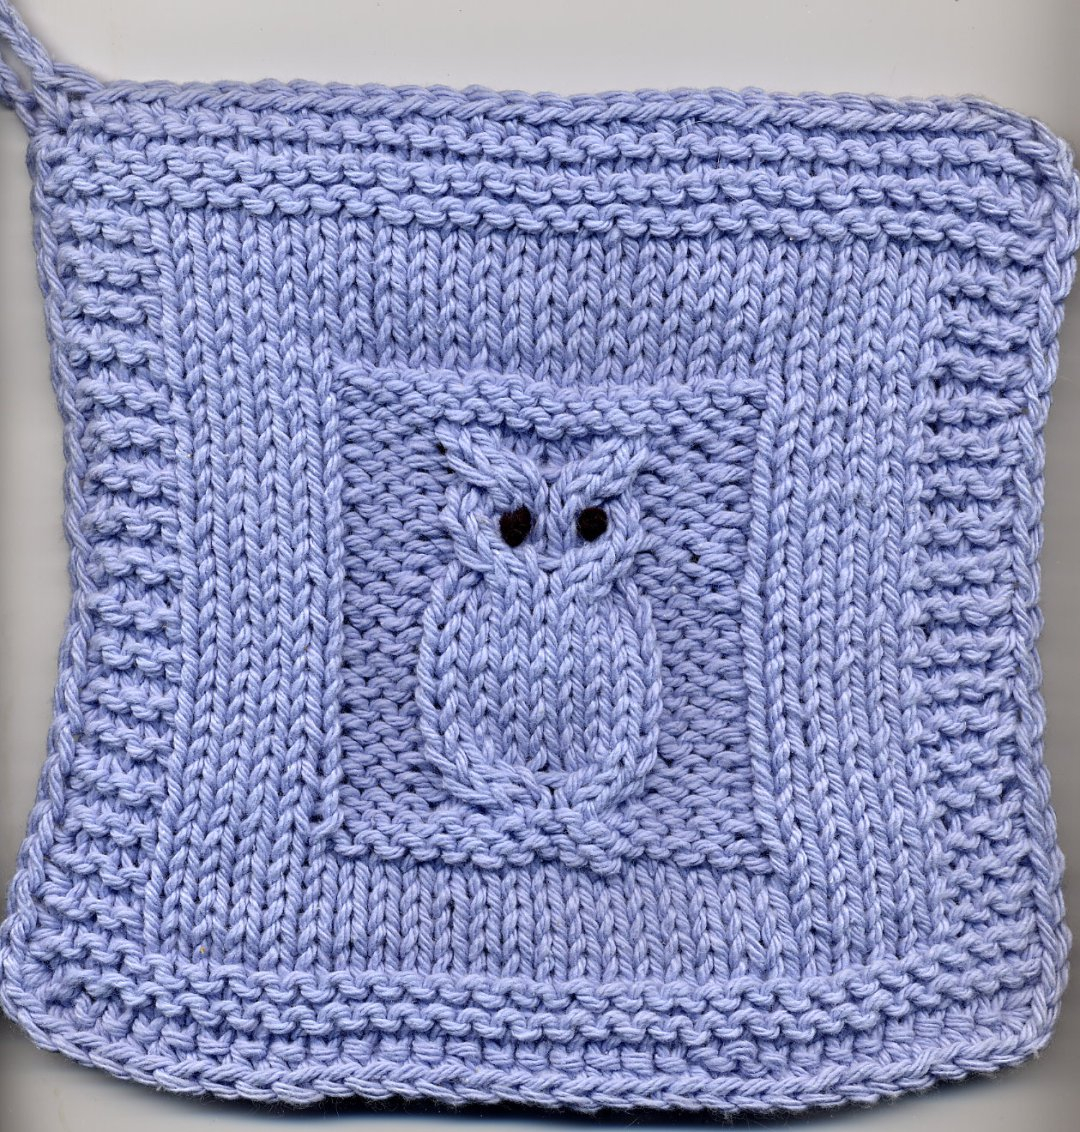 Knitted Butterfly Dishcloth Pattern Dishcloth And Washcloth Knitting Patterns In The Loop Knitting